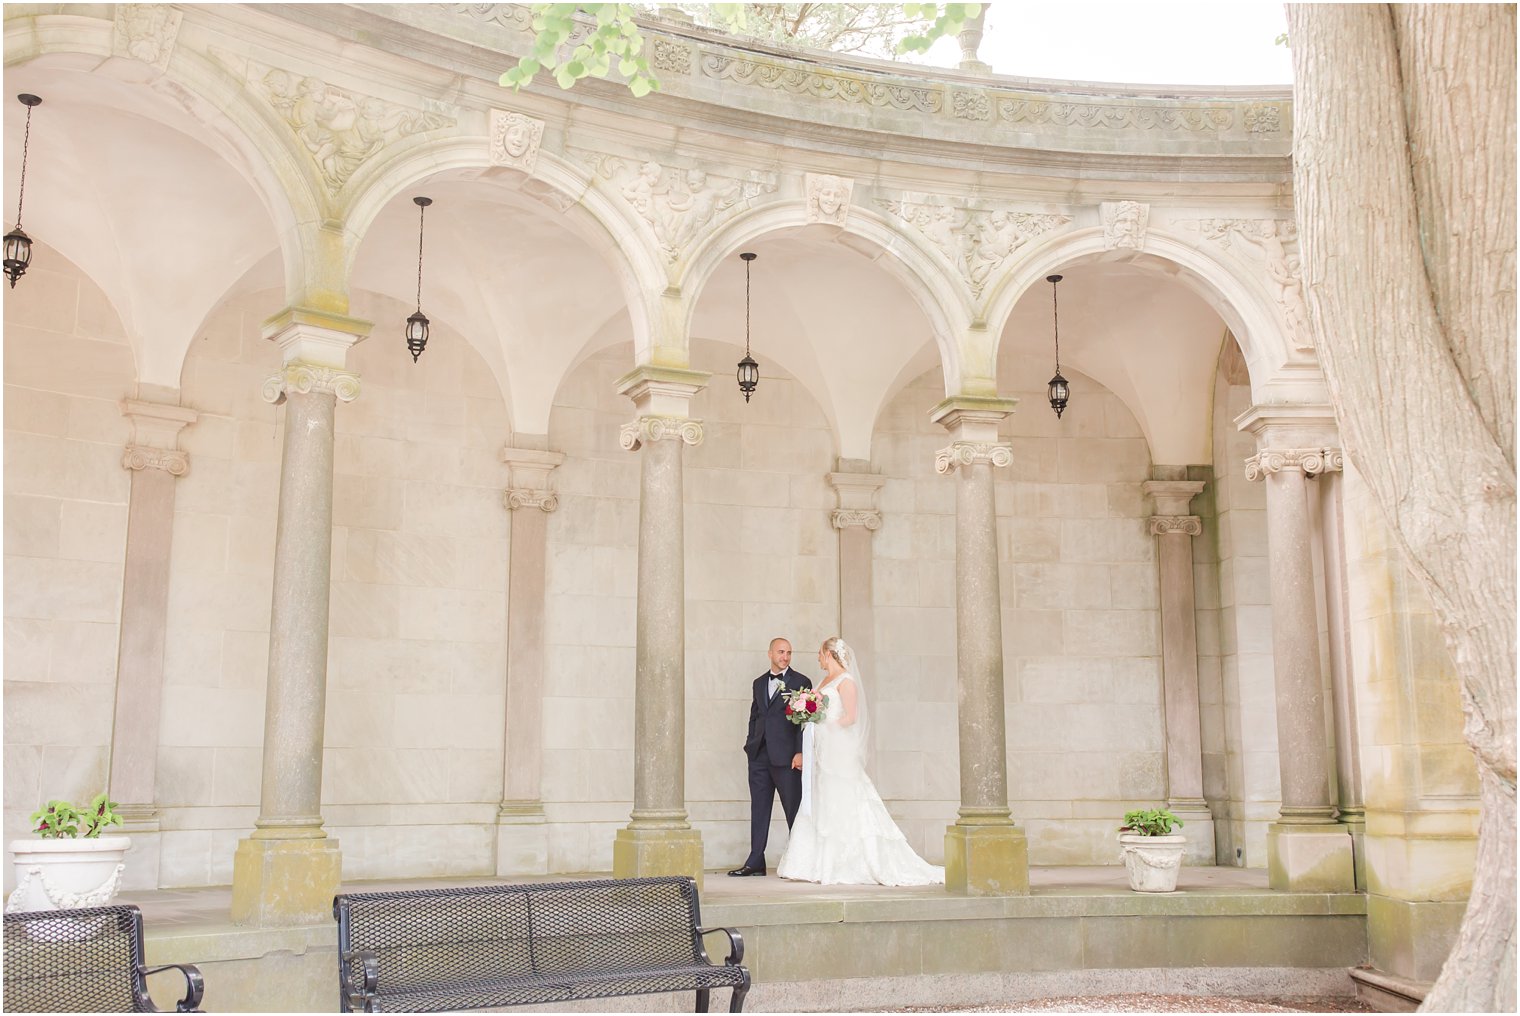 Walking photo of bride and groom at Monmouth University